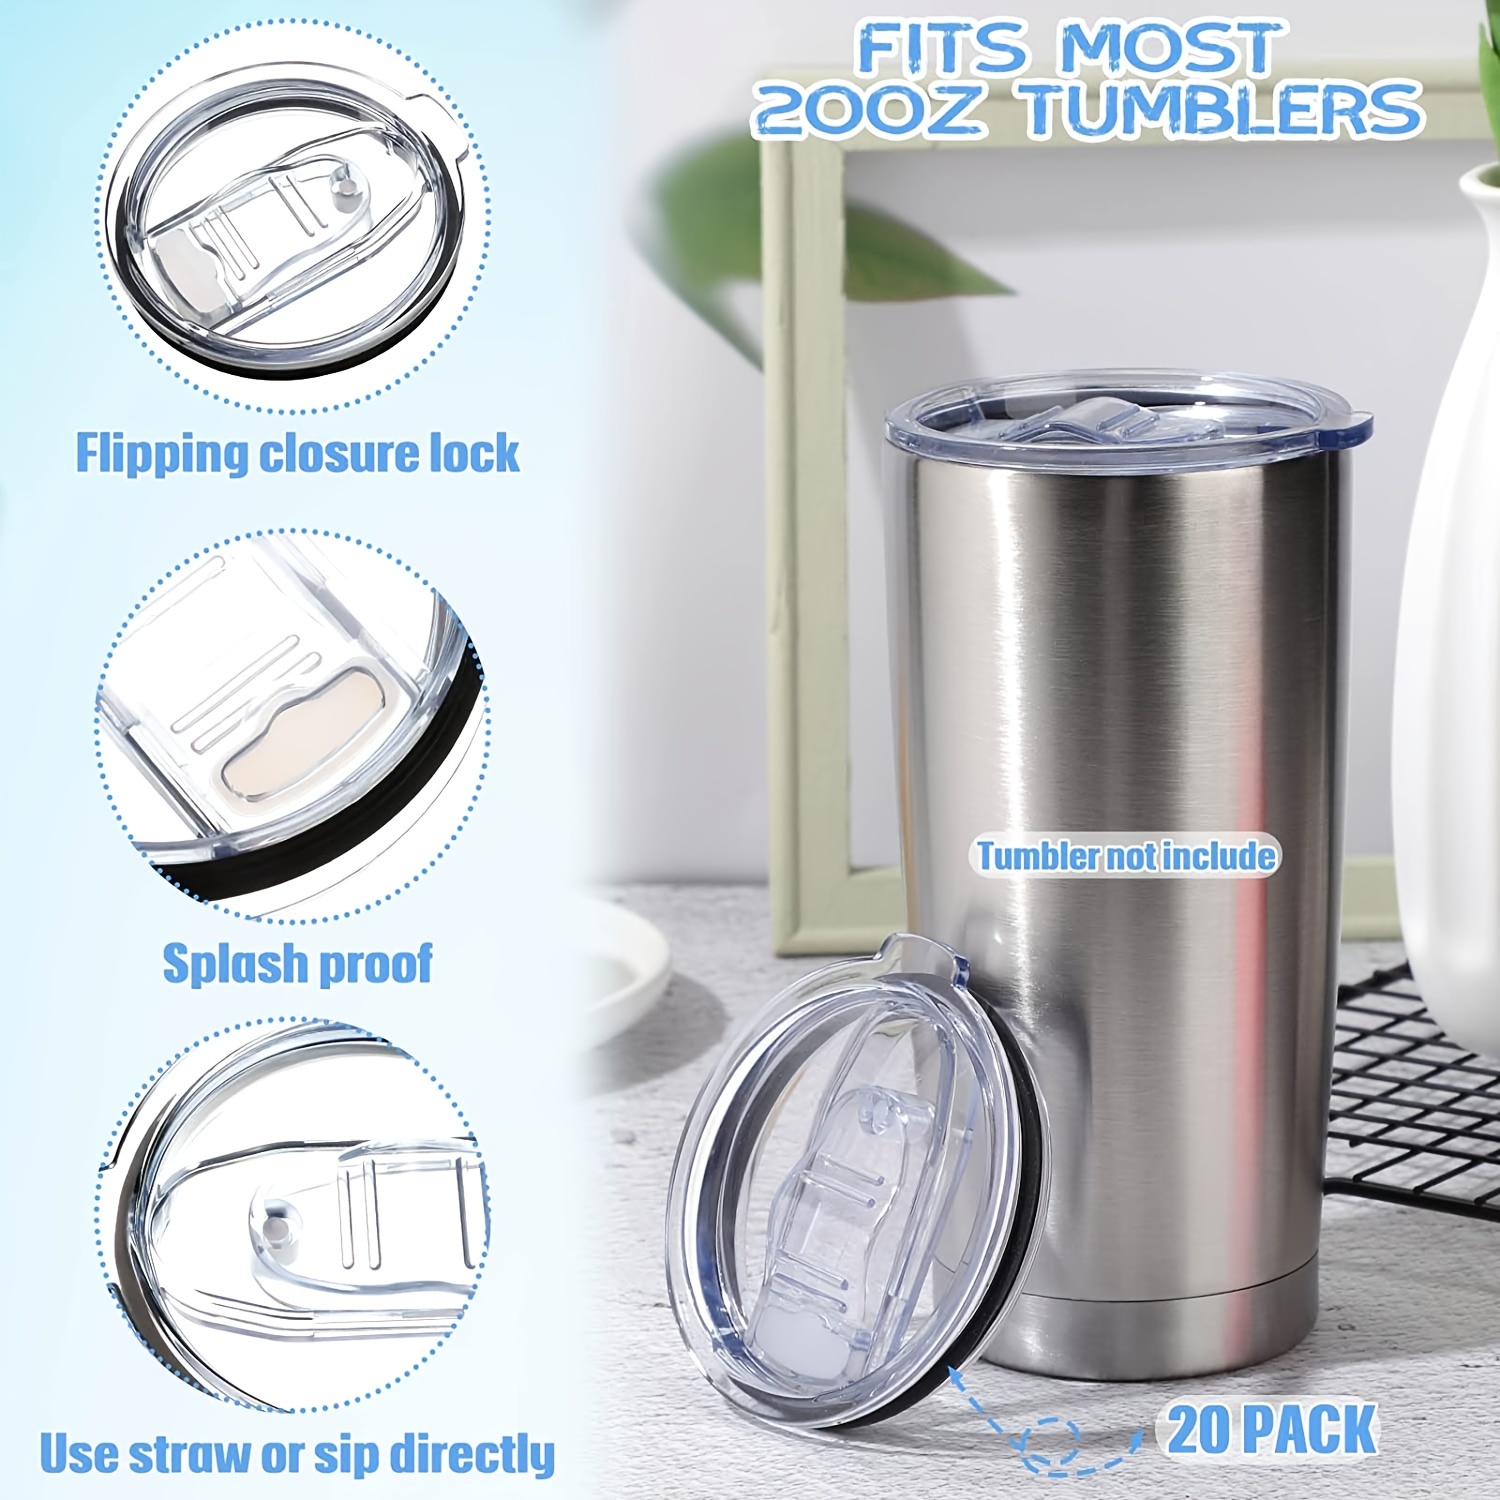 20/10 OZ - 2 Replacement Lids for Yeti Tumblers like Yeti Lids - 3.3 Inch  Diameter - Spill Proof Lids for Yeti Tumblers - Tumbler Lid for Replacement